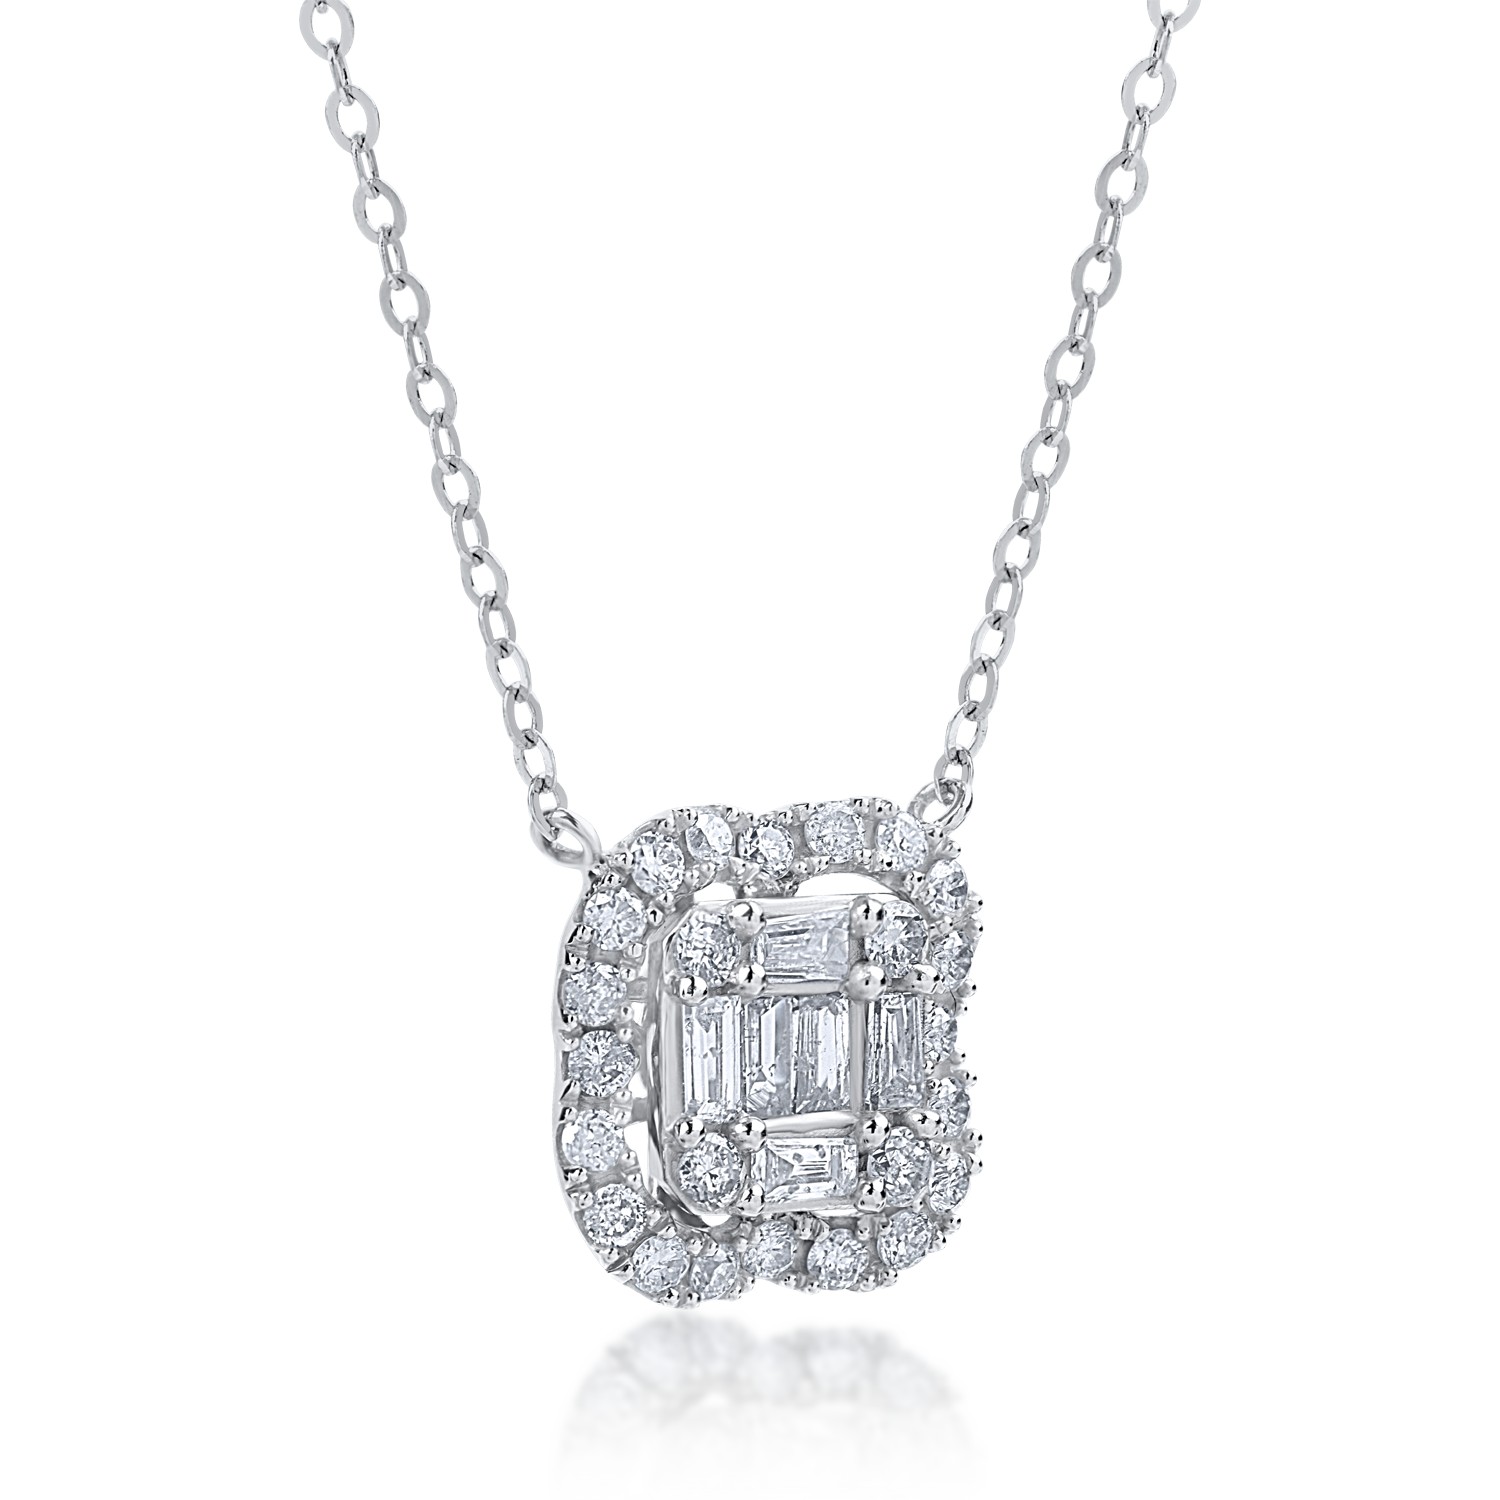 White gold pendant necklace with 0.42ct diamonds